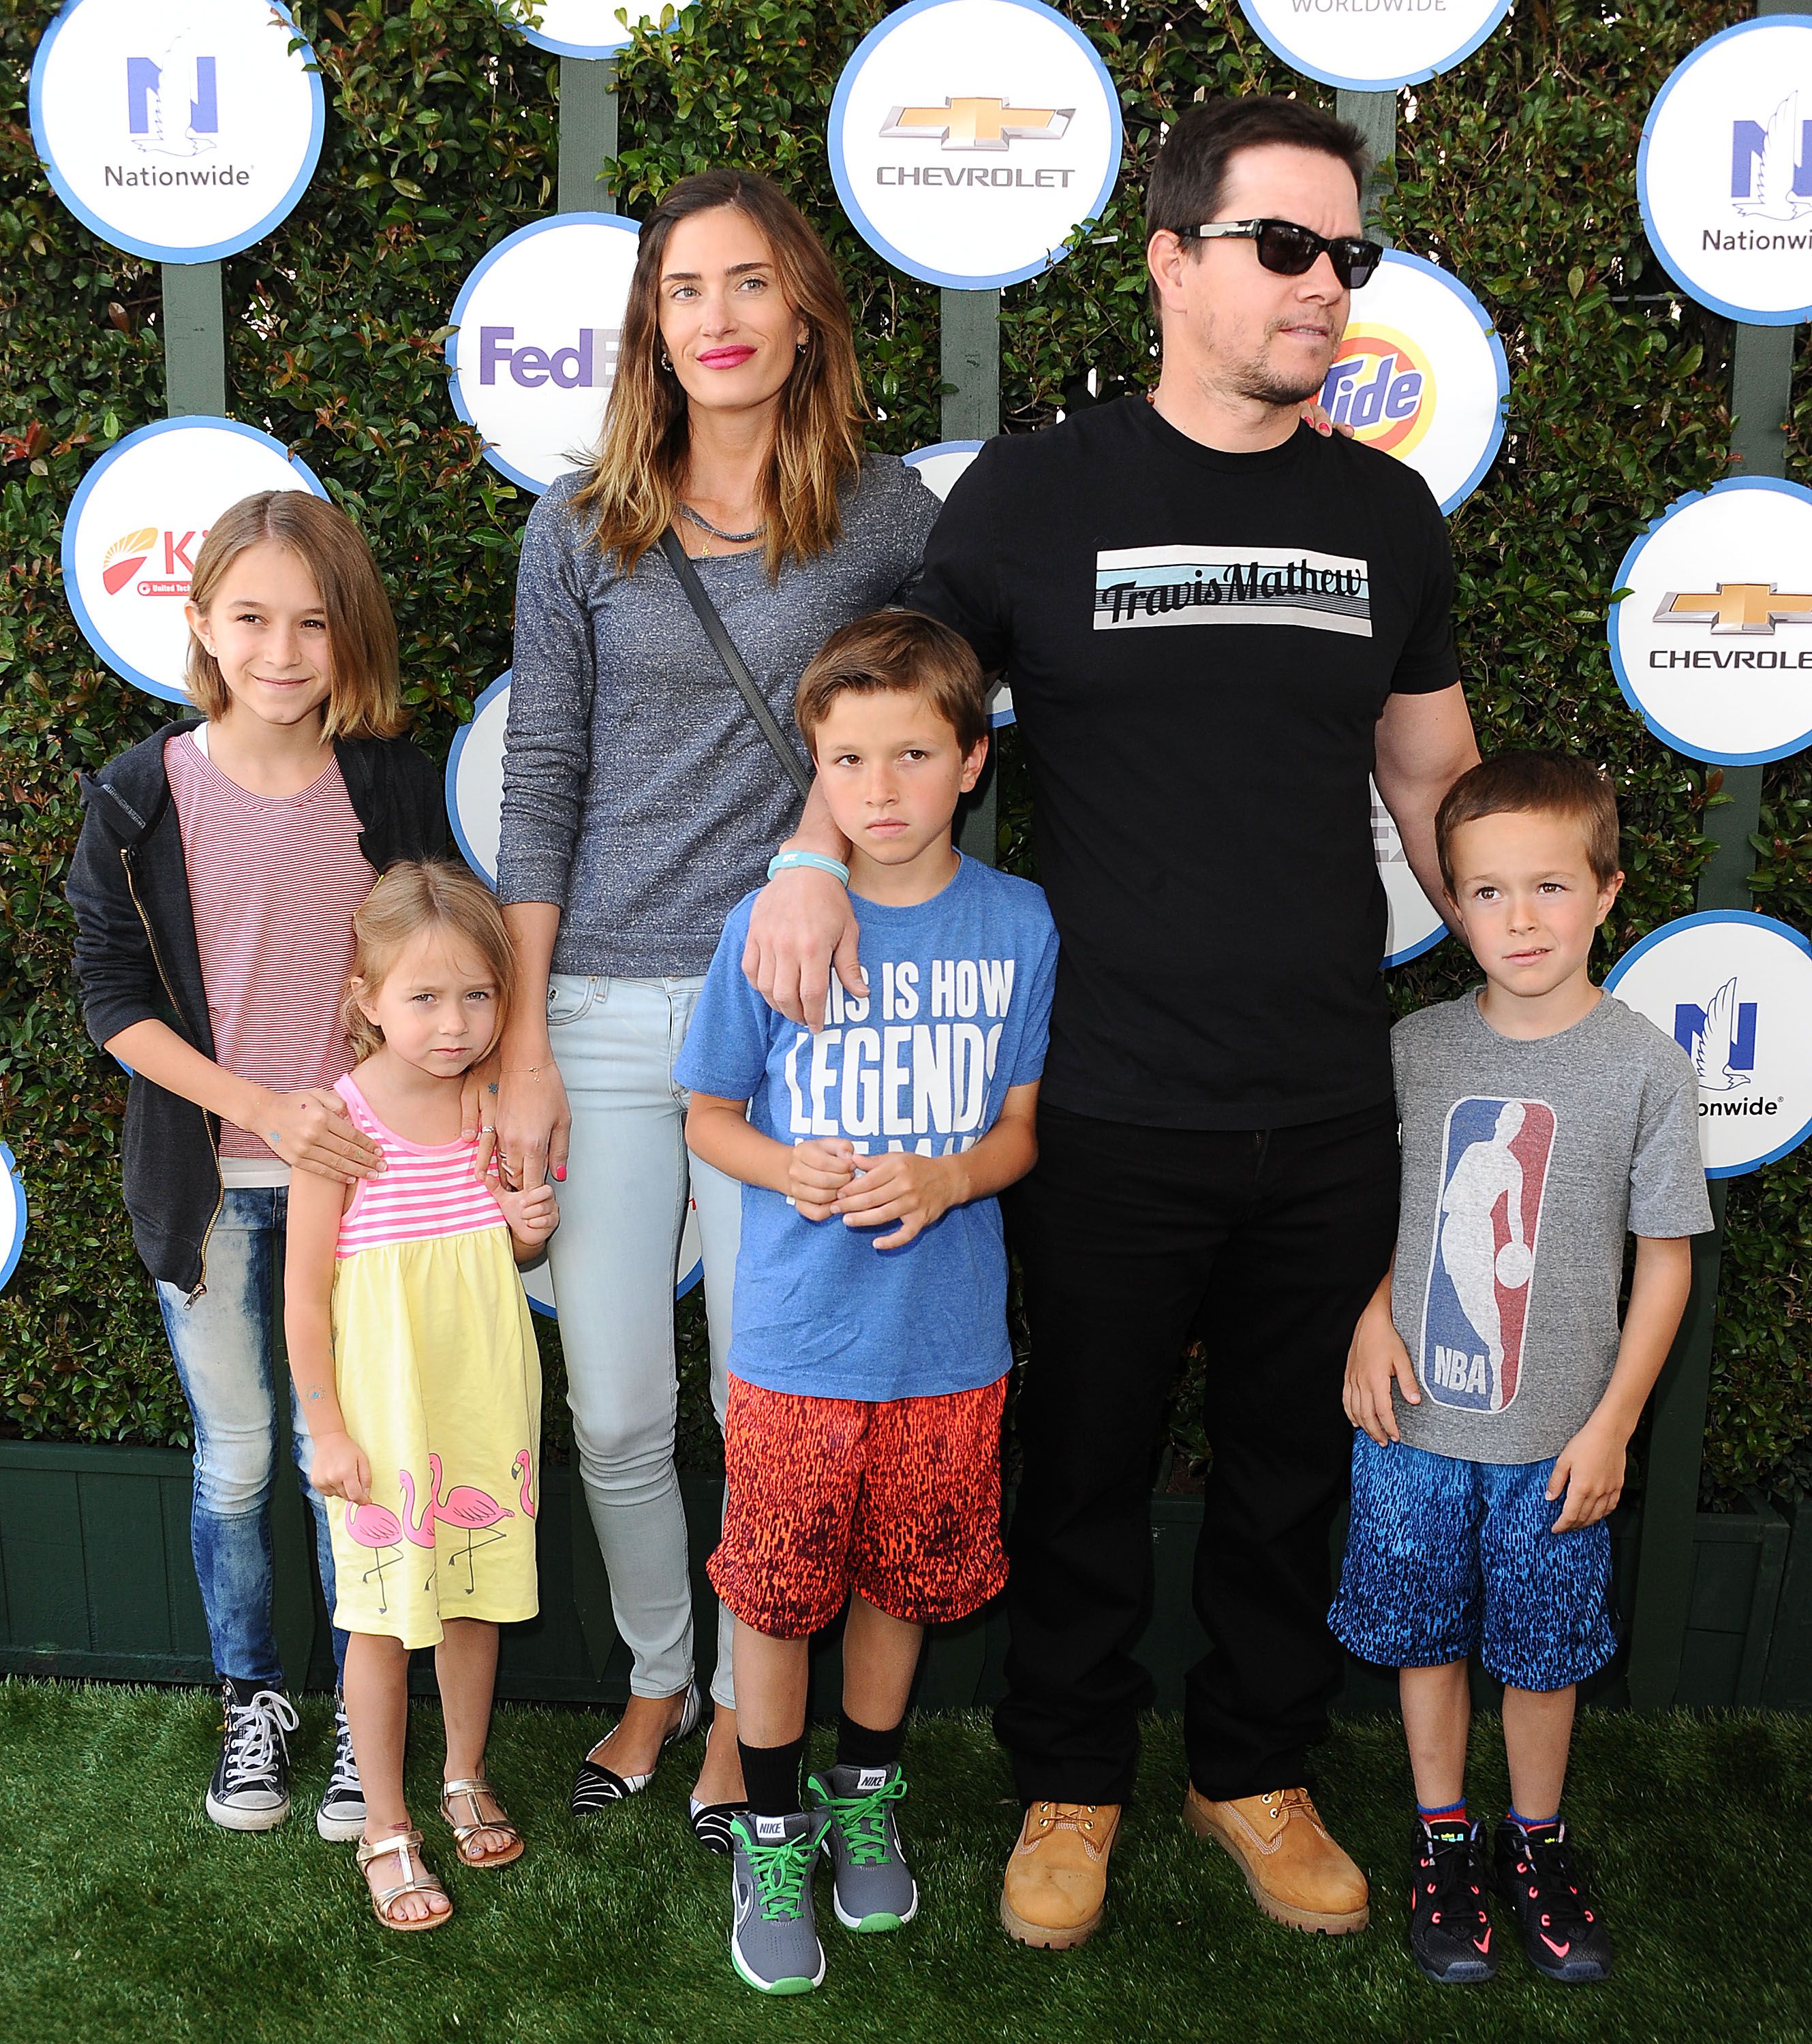 Mark Wahlberg and Rhea Durham alongside their kids attend Safe Kids Day at The Lot on April 26, 2015 in West Hollywood, California. | Photo: Getty Images